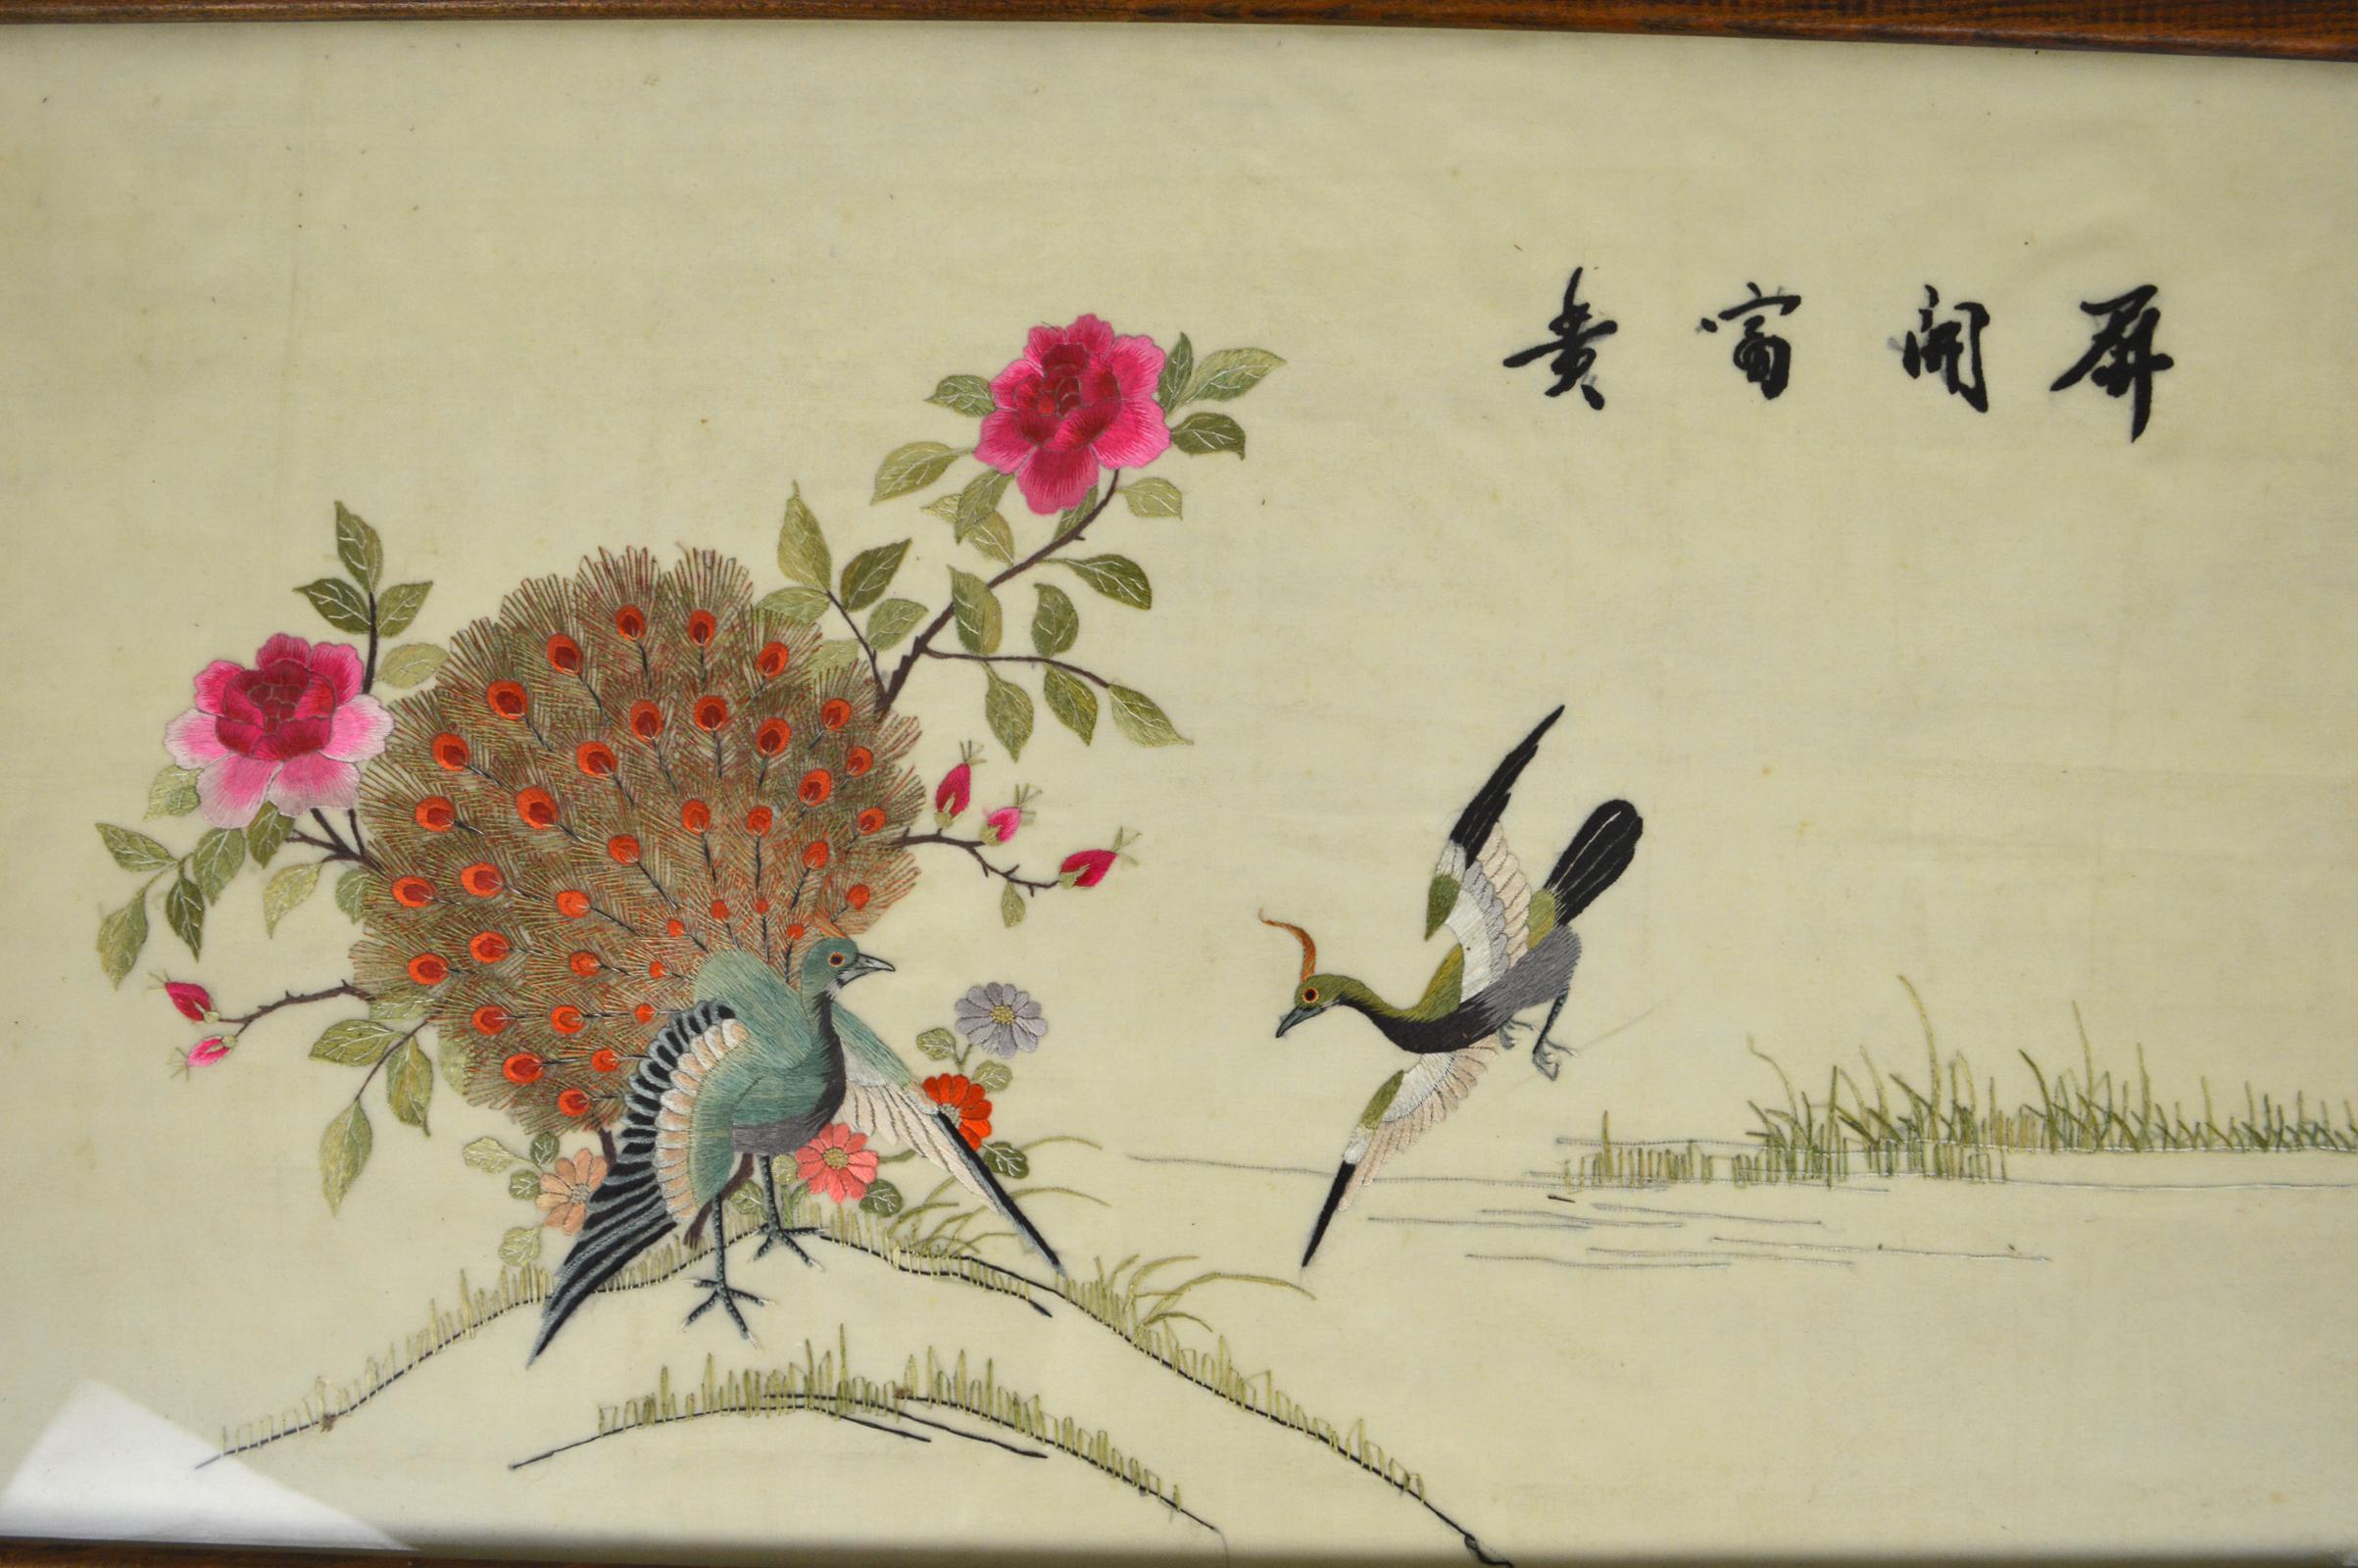 Textile embroidered with silk.
Subject: birds.
A bird flies over a swamp. A peacock on the ground parades and is surrounded by flowers, roses.
Asia, Indochina / Tonkin ( actual Vietnam), circa 1940.
Very good condition ( framed, under glass).